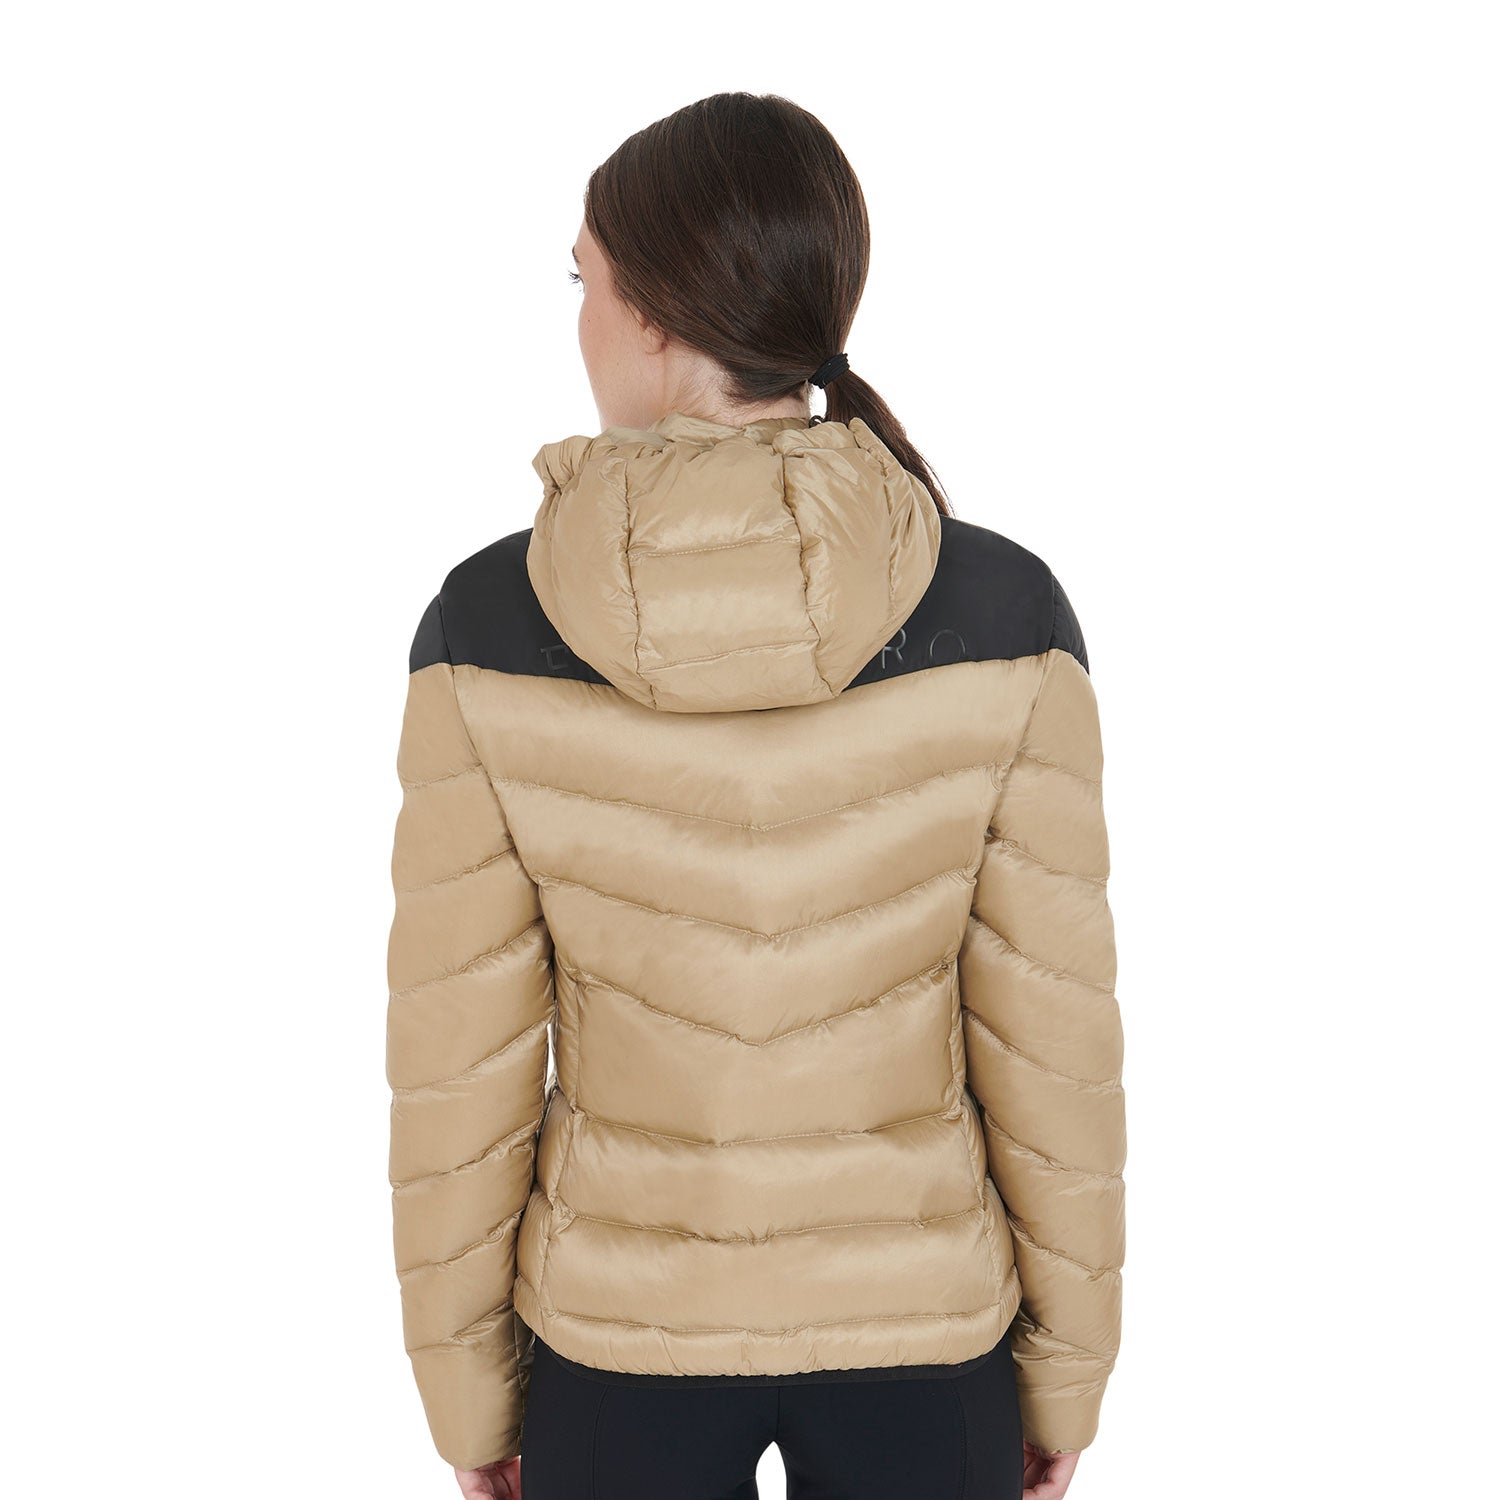 Warm winter riding jacket for horse riders